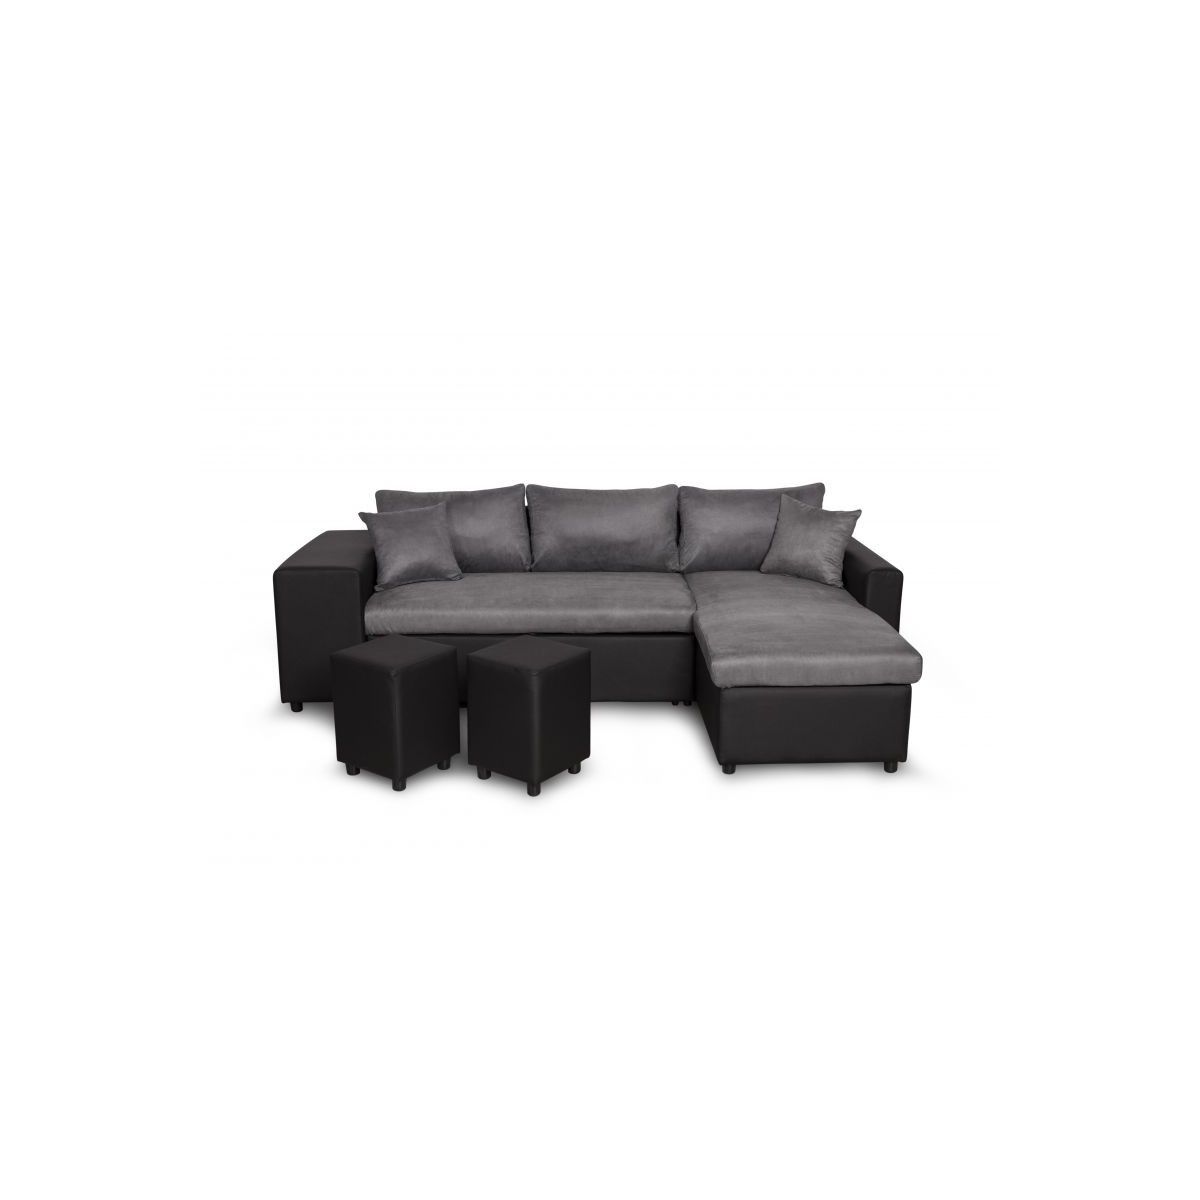 Corner Sofa Convertible Microfiber And Imitation Niche On The Left Bento  (grey, Black) Throughout Microfiber Sectional Corner Sofas (View 5 of 15)